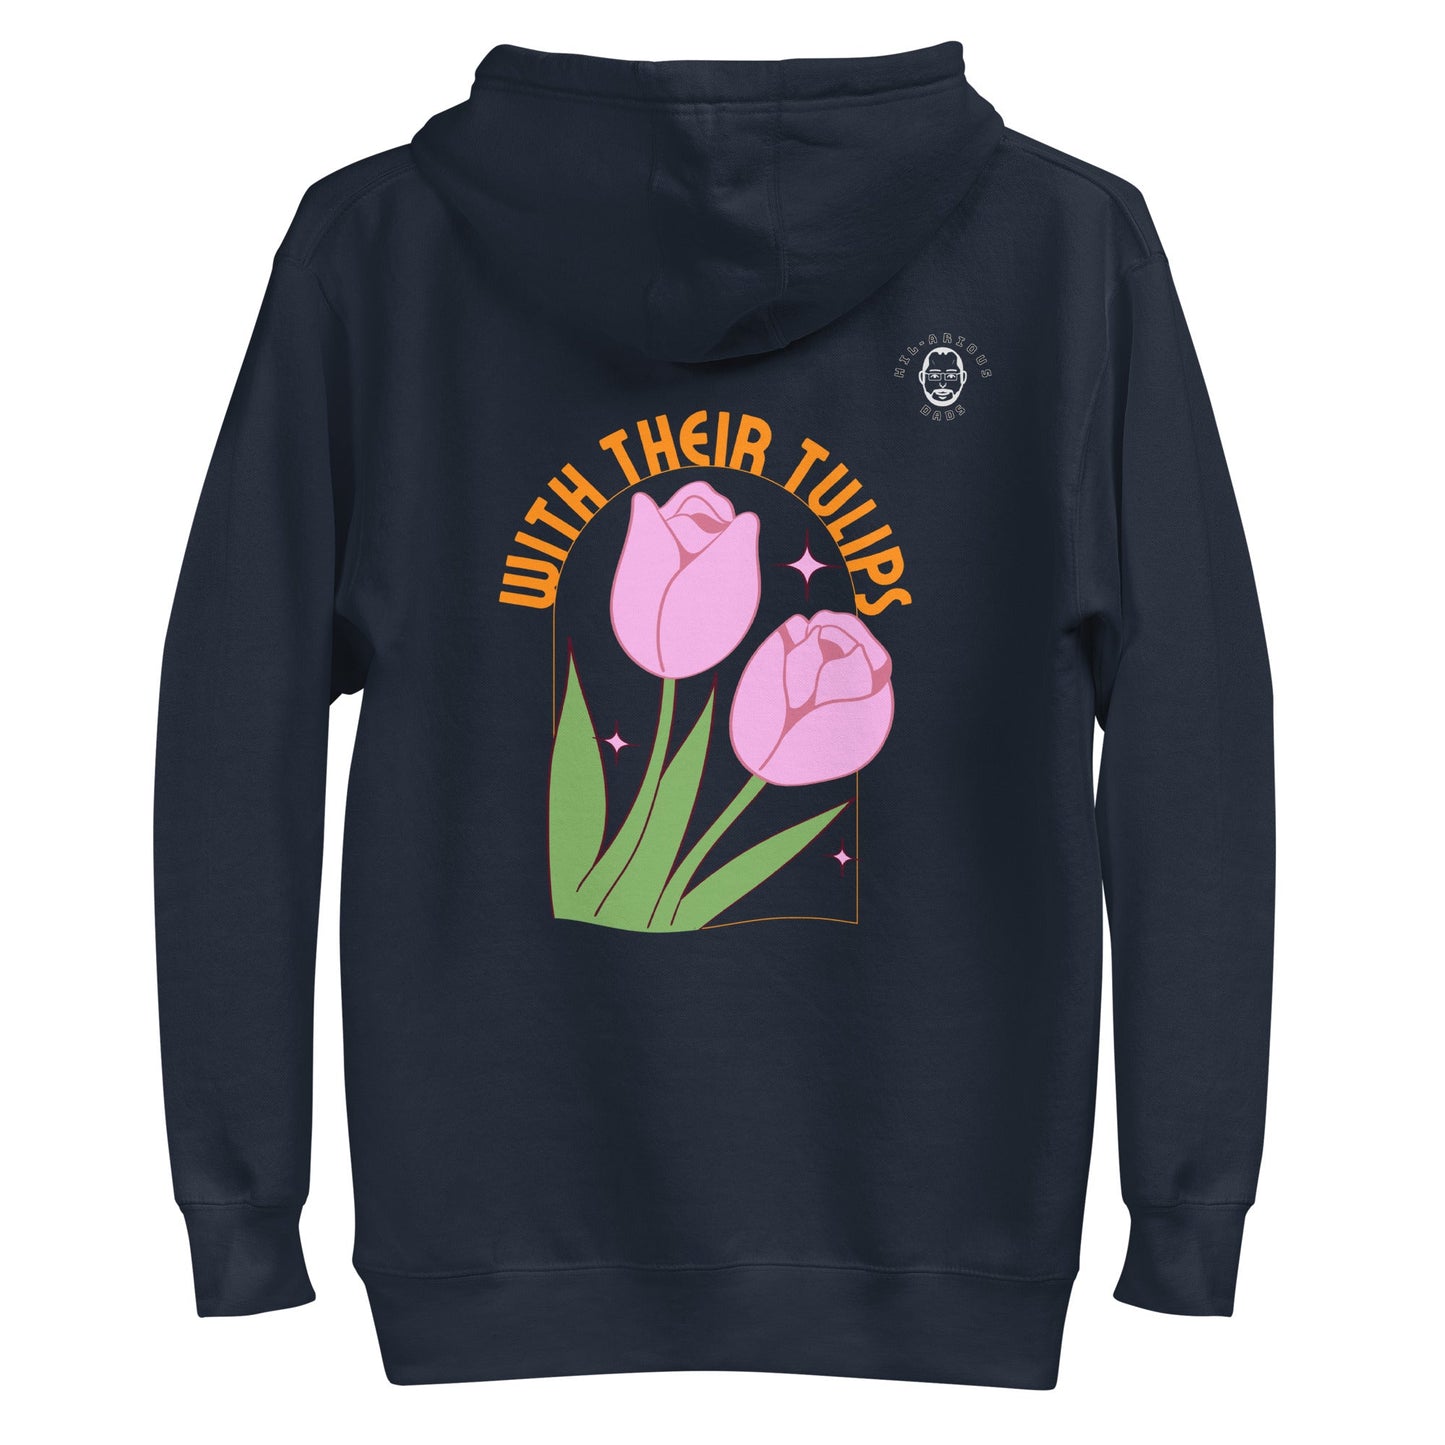 How do April flowers kiss?-Hoodie - Hil-arious Dads